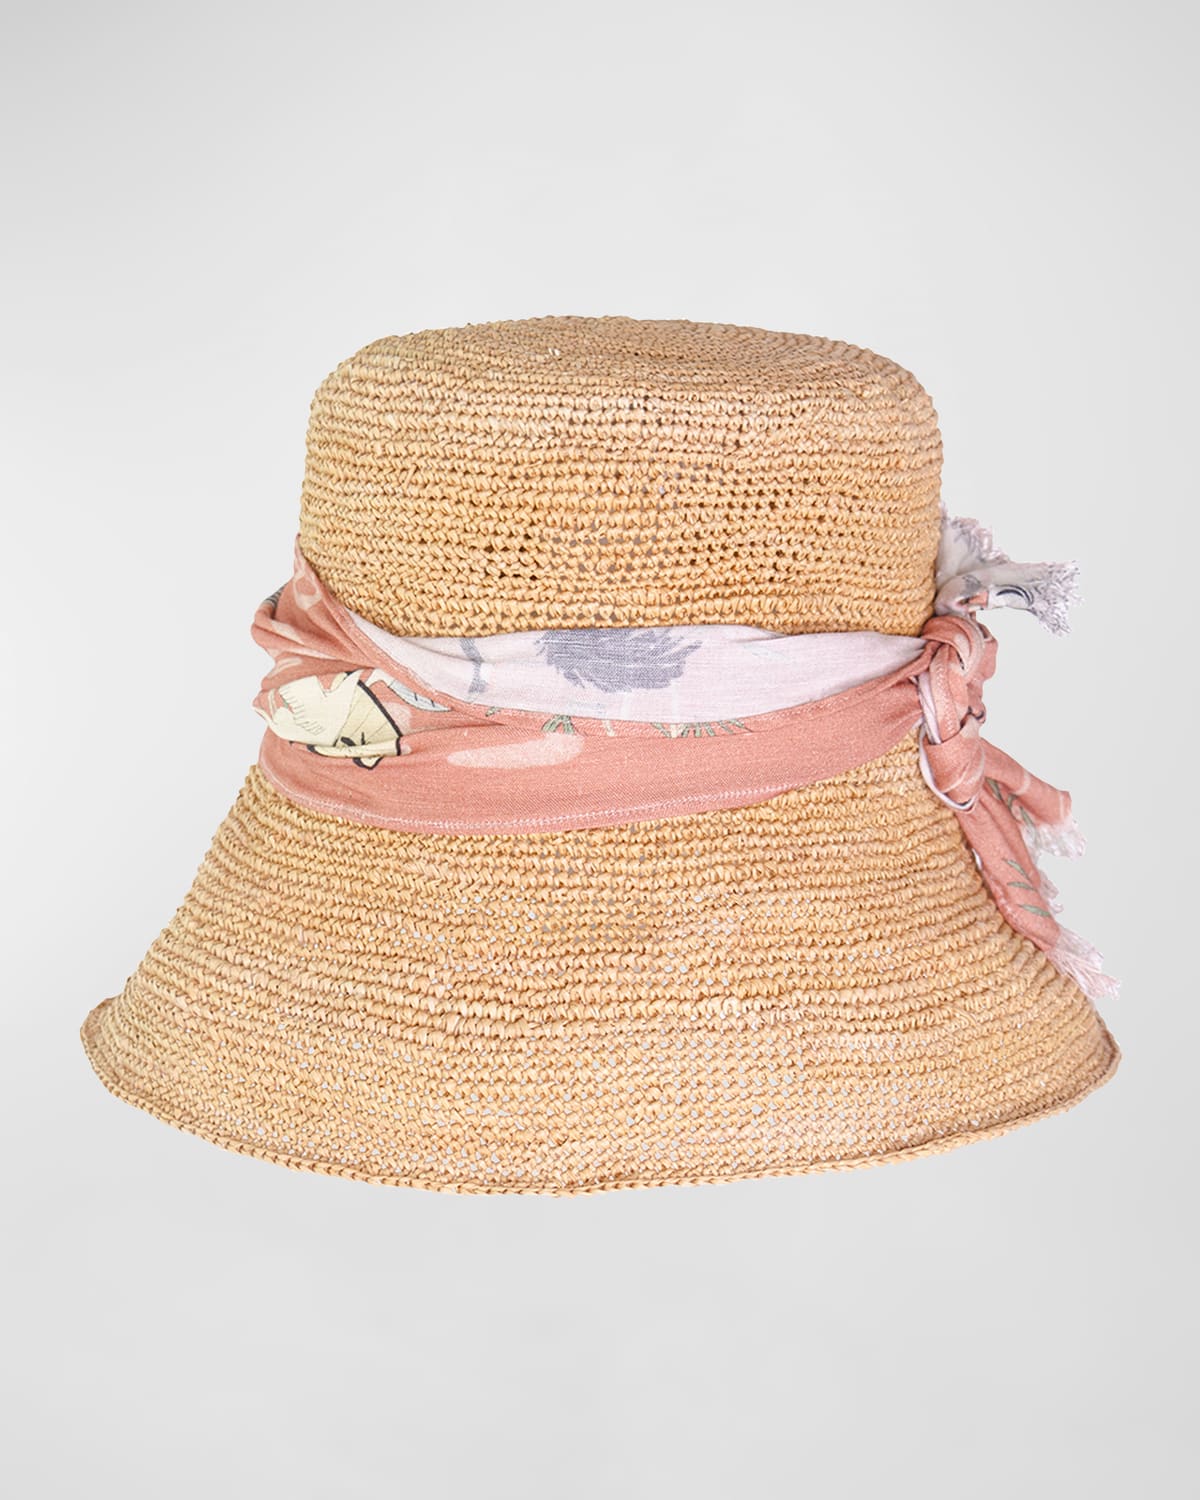 Shop Sensi Studio Lampshade Crocheted Bucket Hat With A Tied Band In Beige Straw